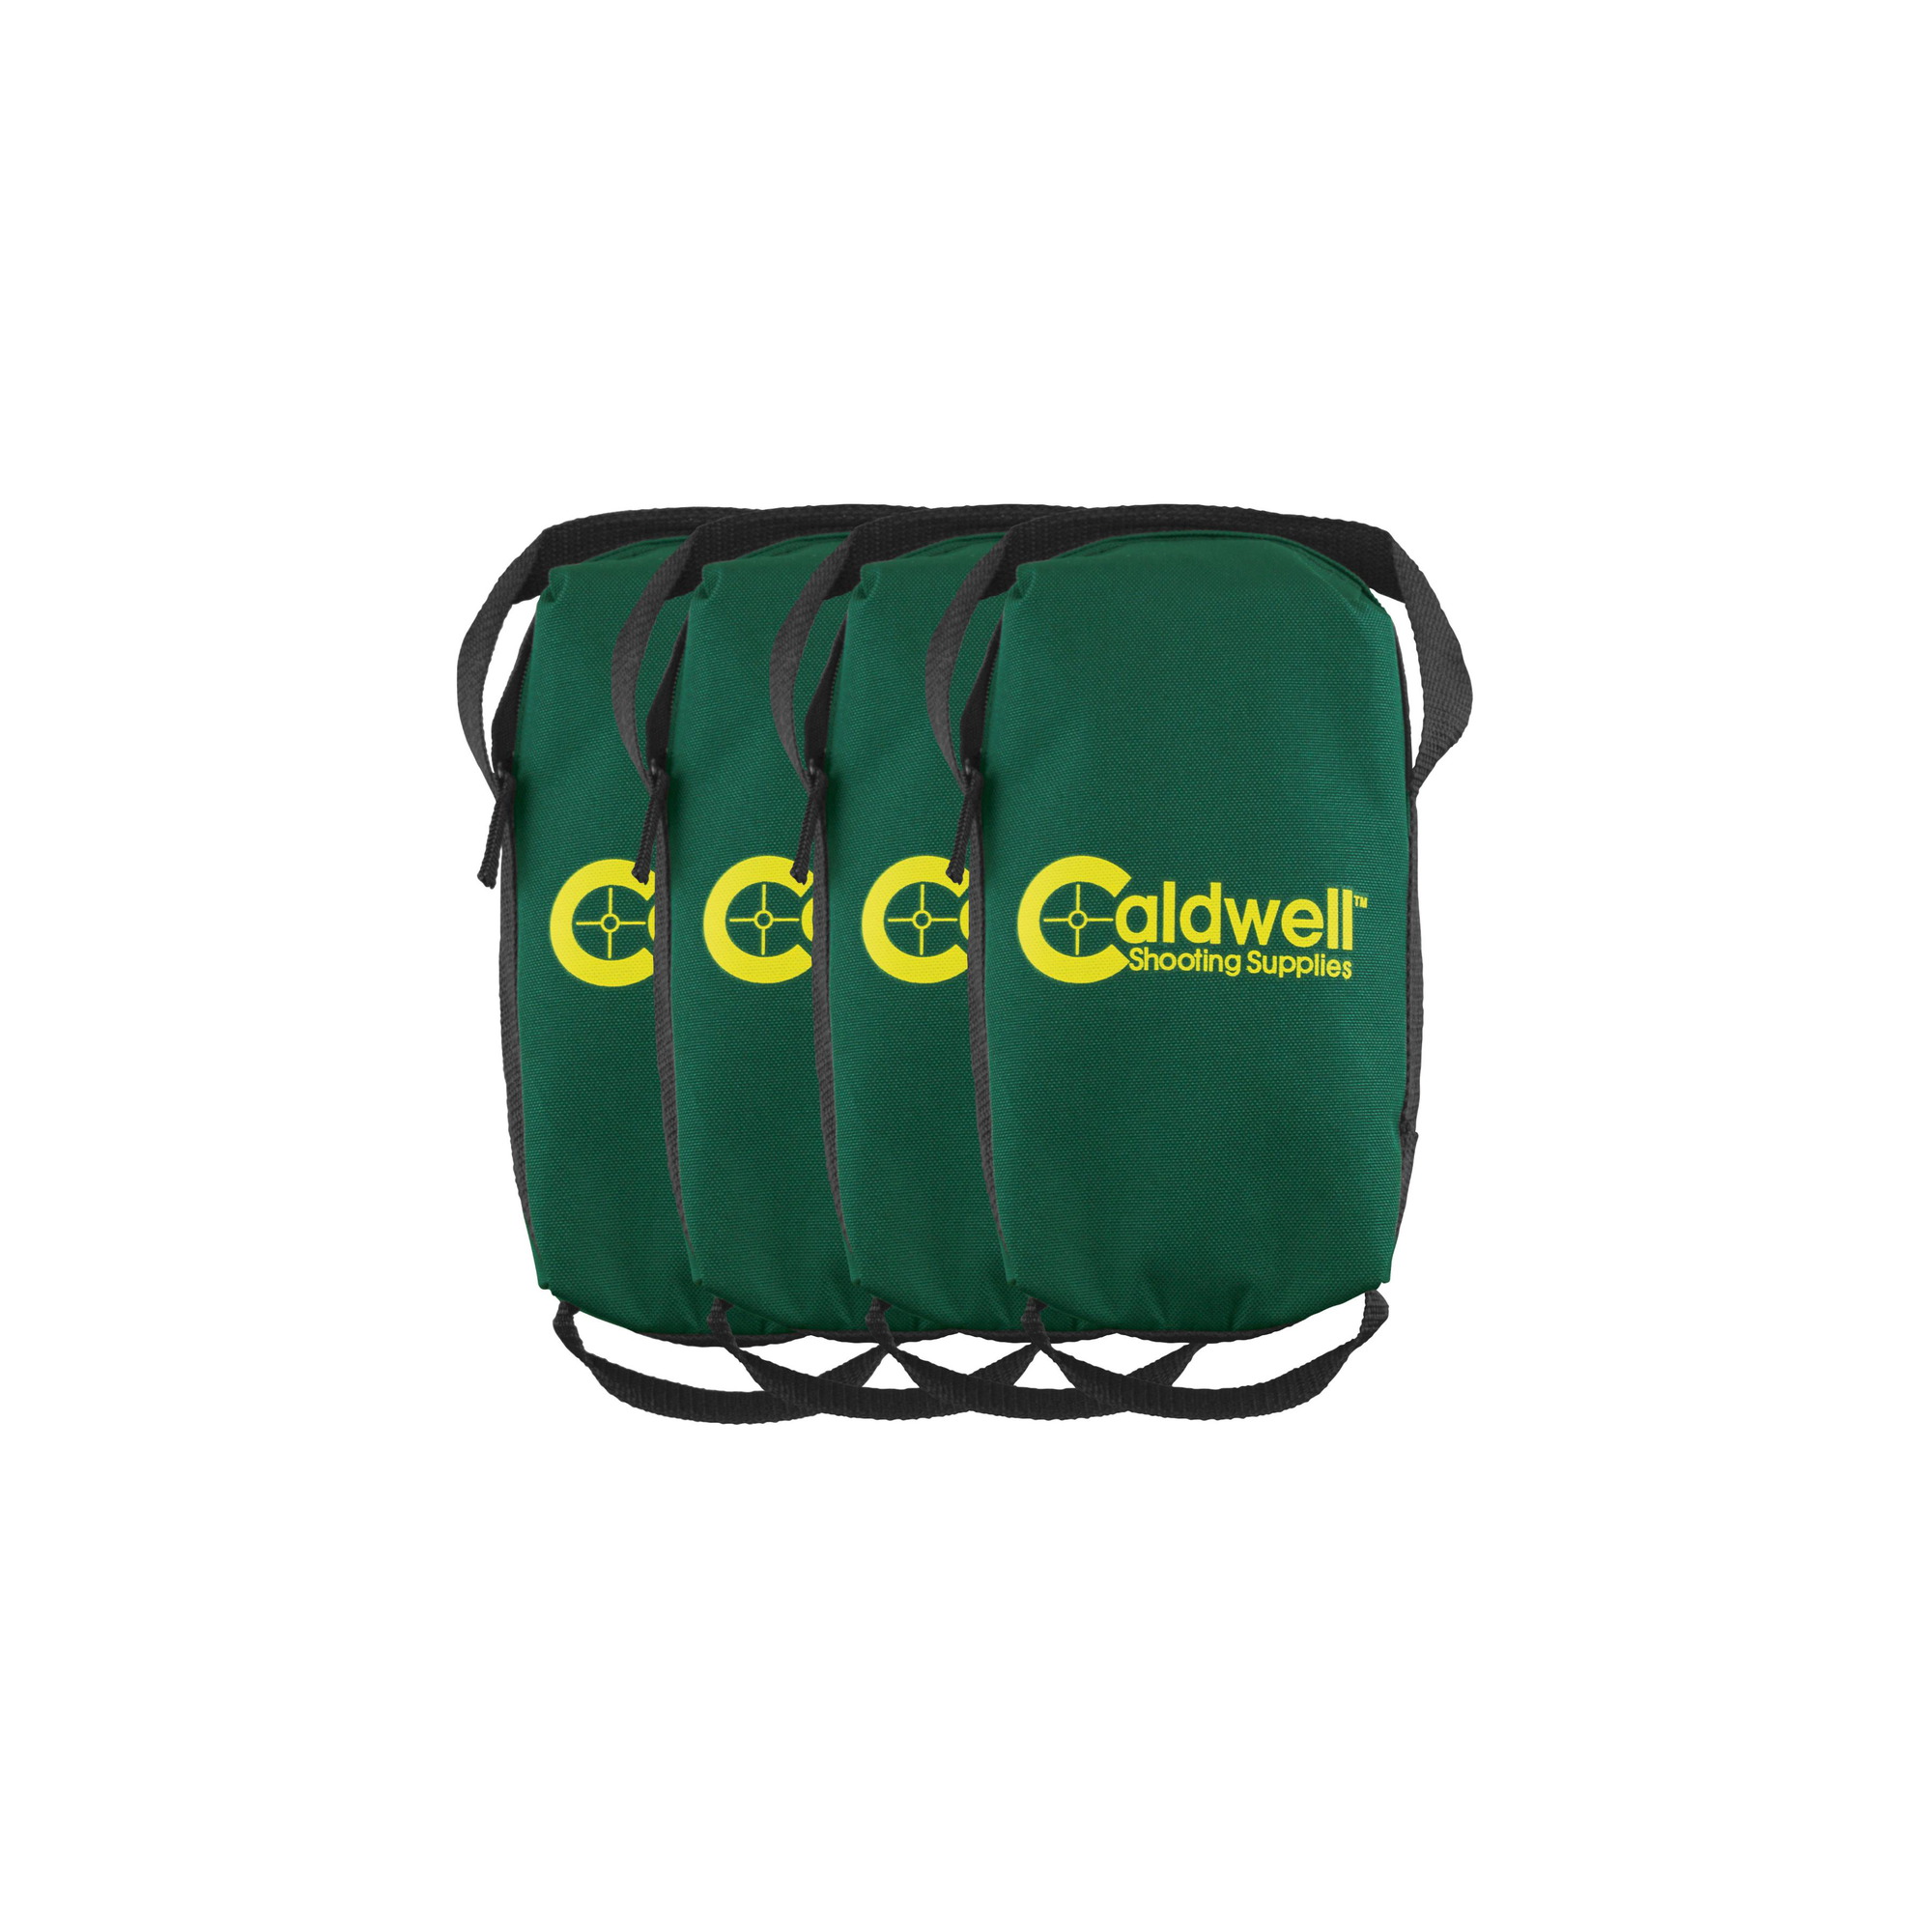 Bti 533117 Caldwell Lead Sled Weight Bag Standard 4 Pack Unfilled 